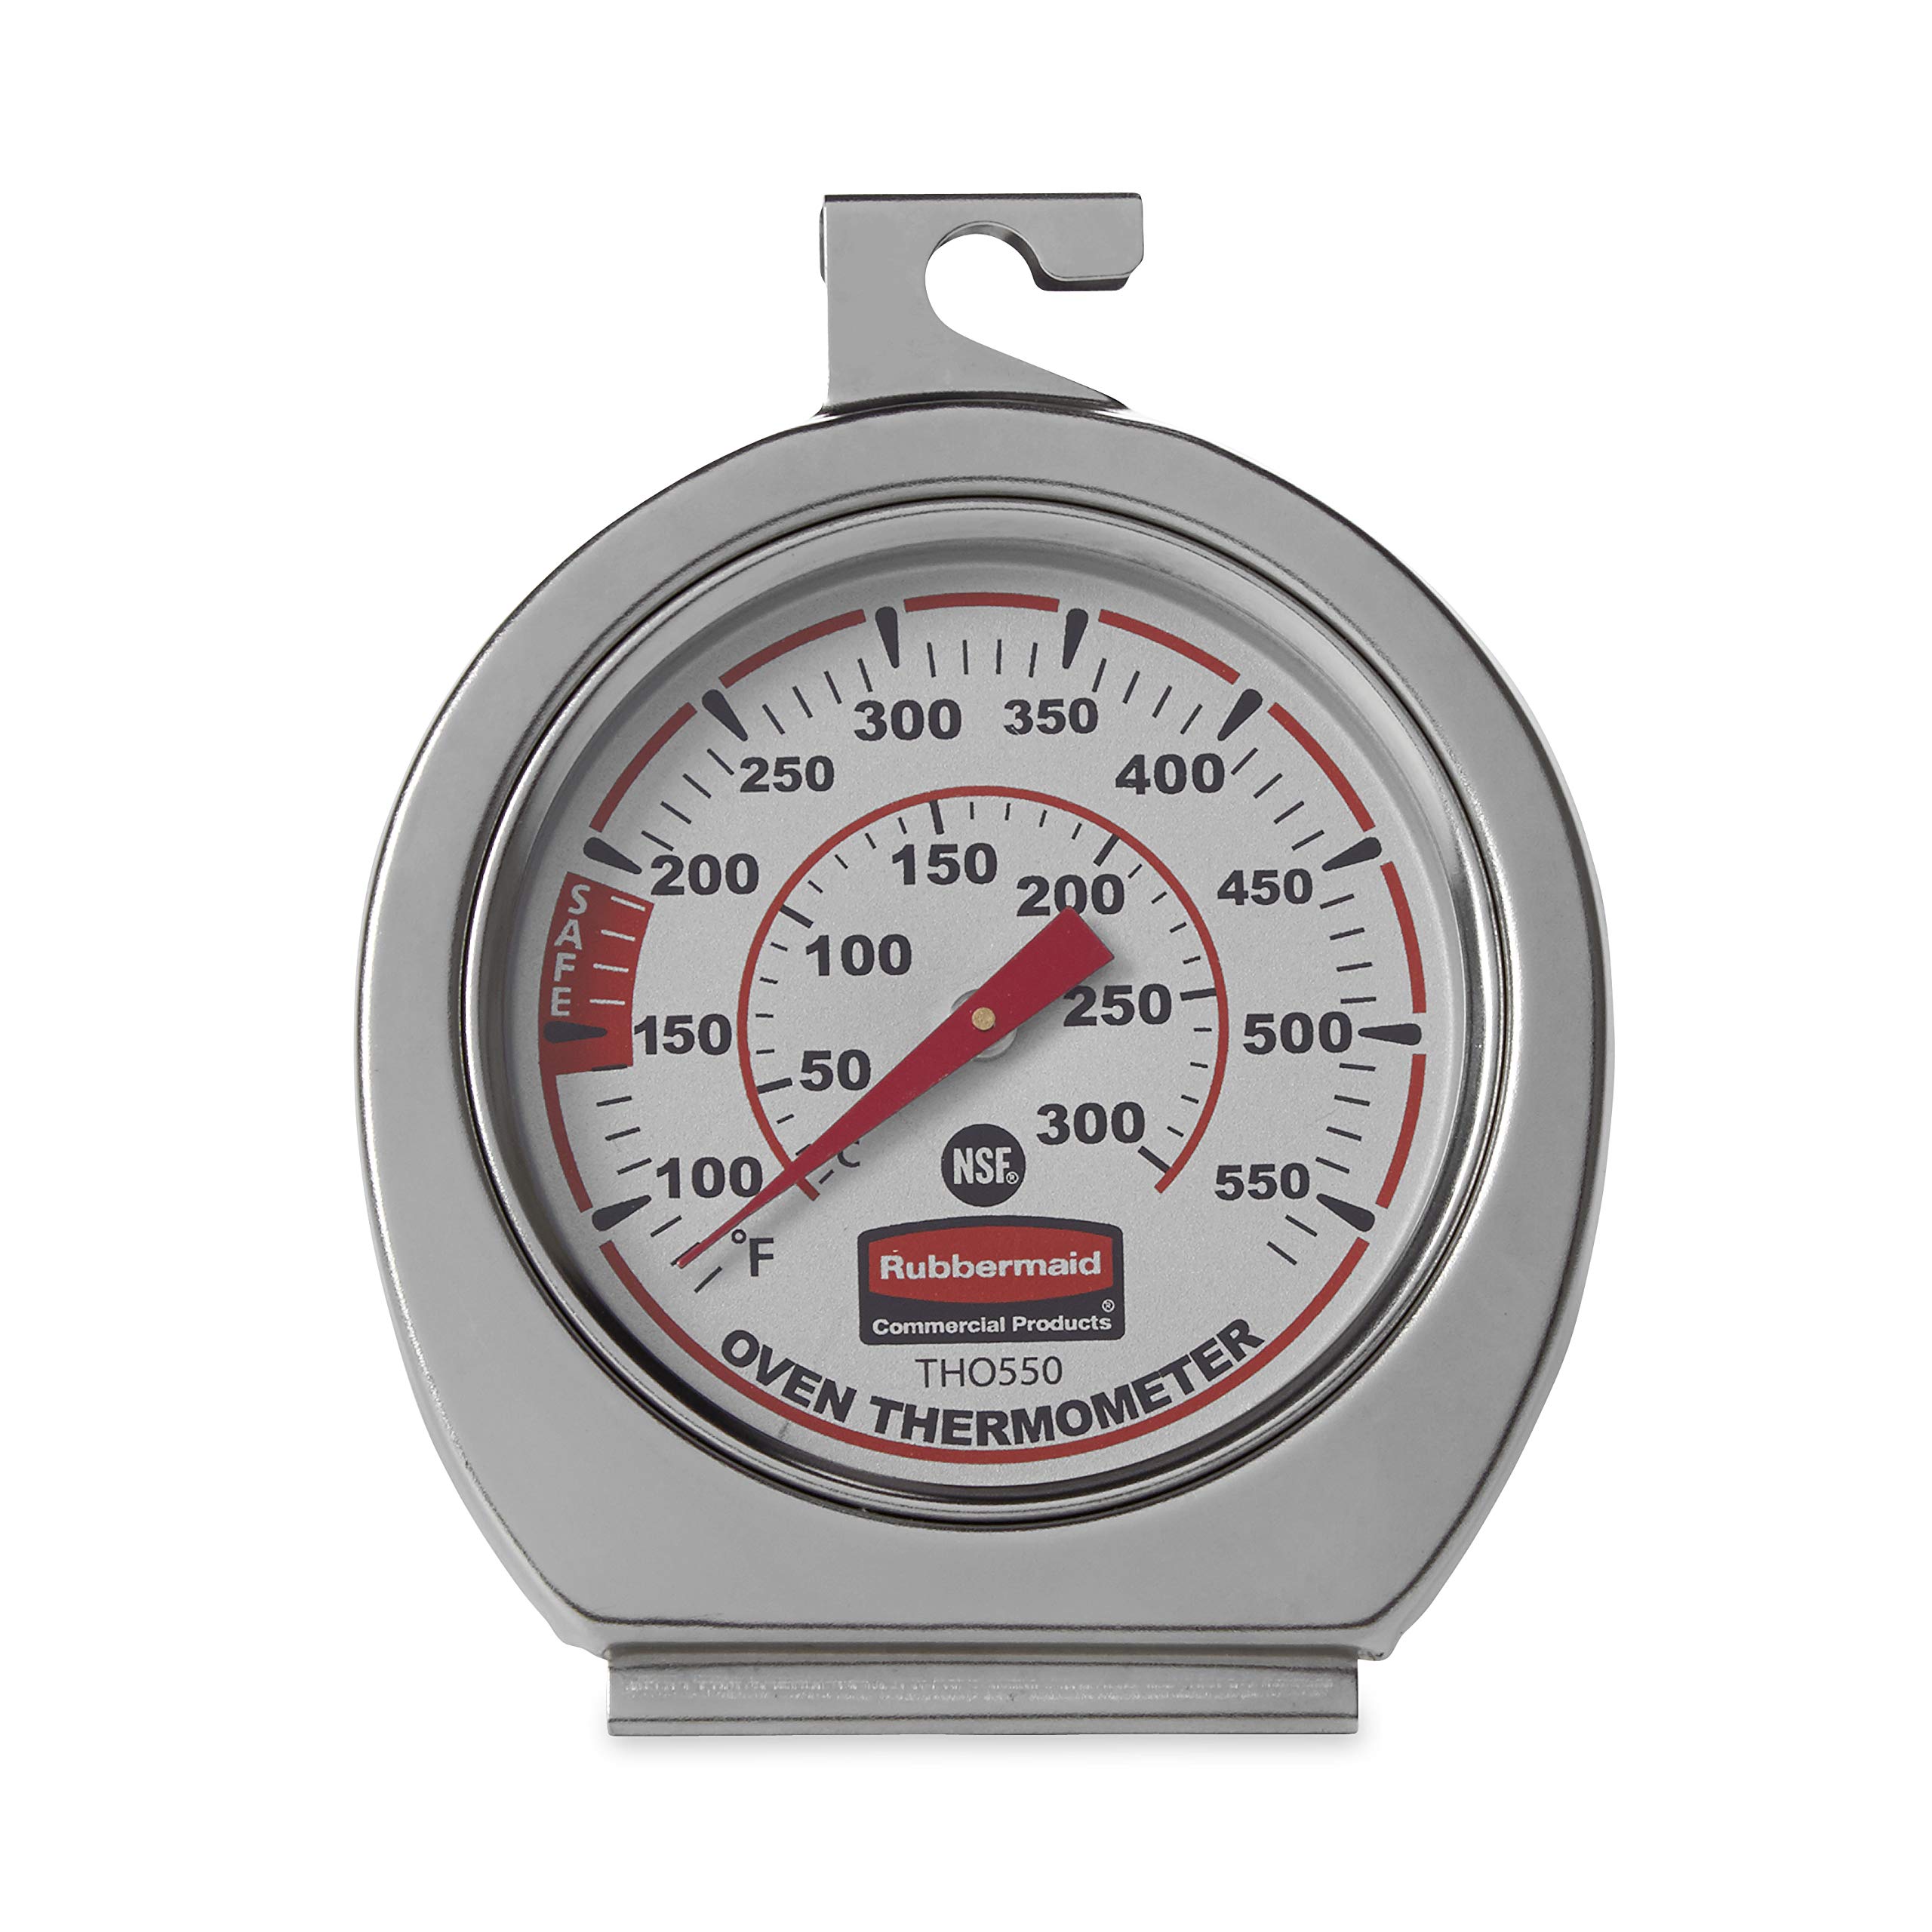 Rubbermaid Commercial Products Stainless Steel Monitoring Thermometer for Oven/Grill/Smoking Meat/Food